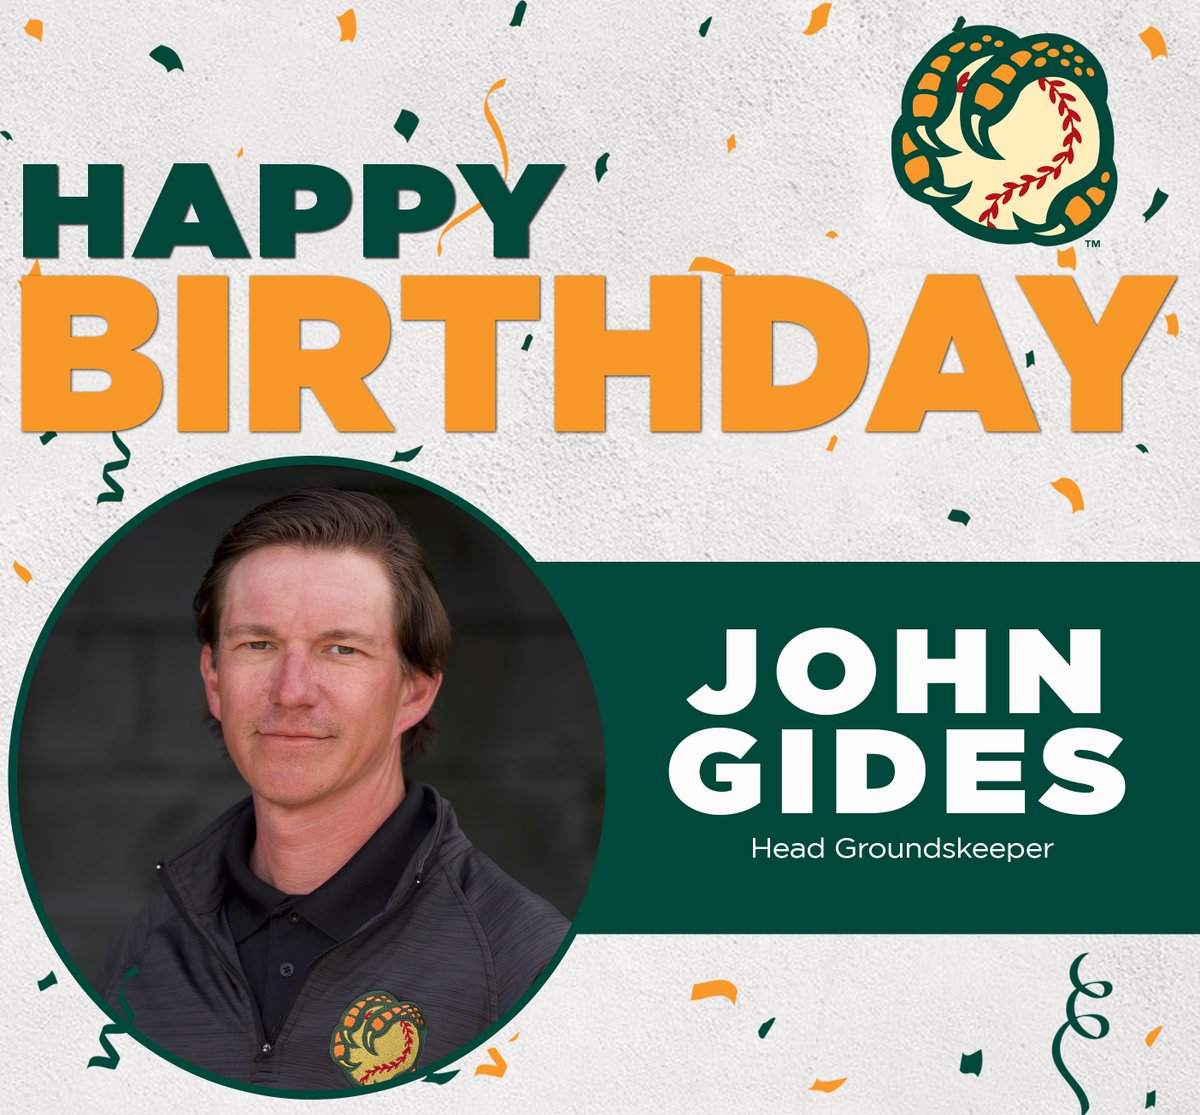 Happy birthday to our Head Groundskeeper, John Gides!🥳